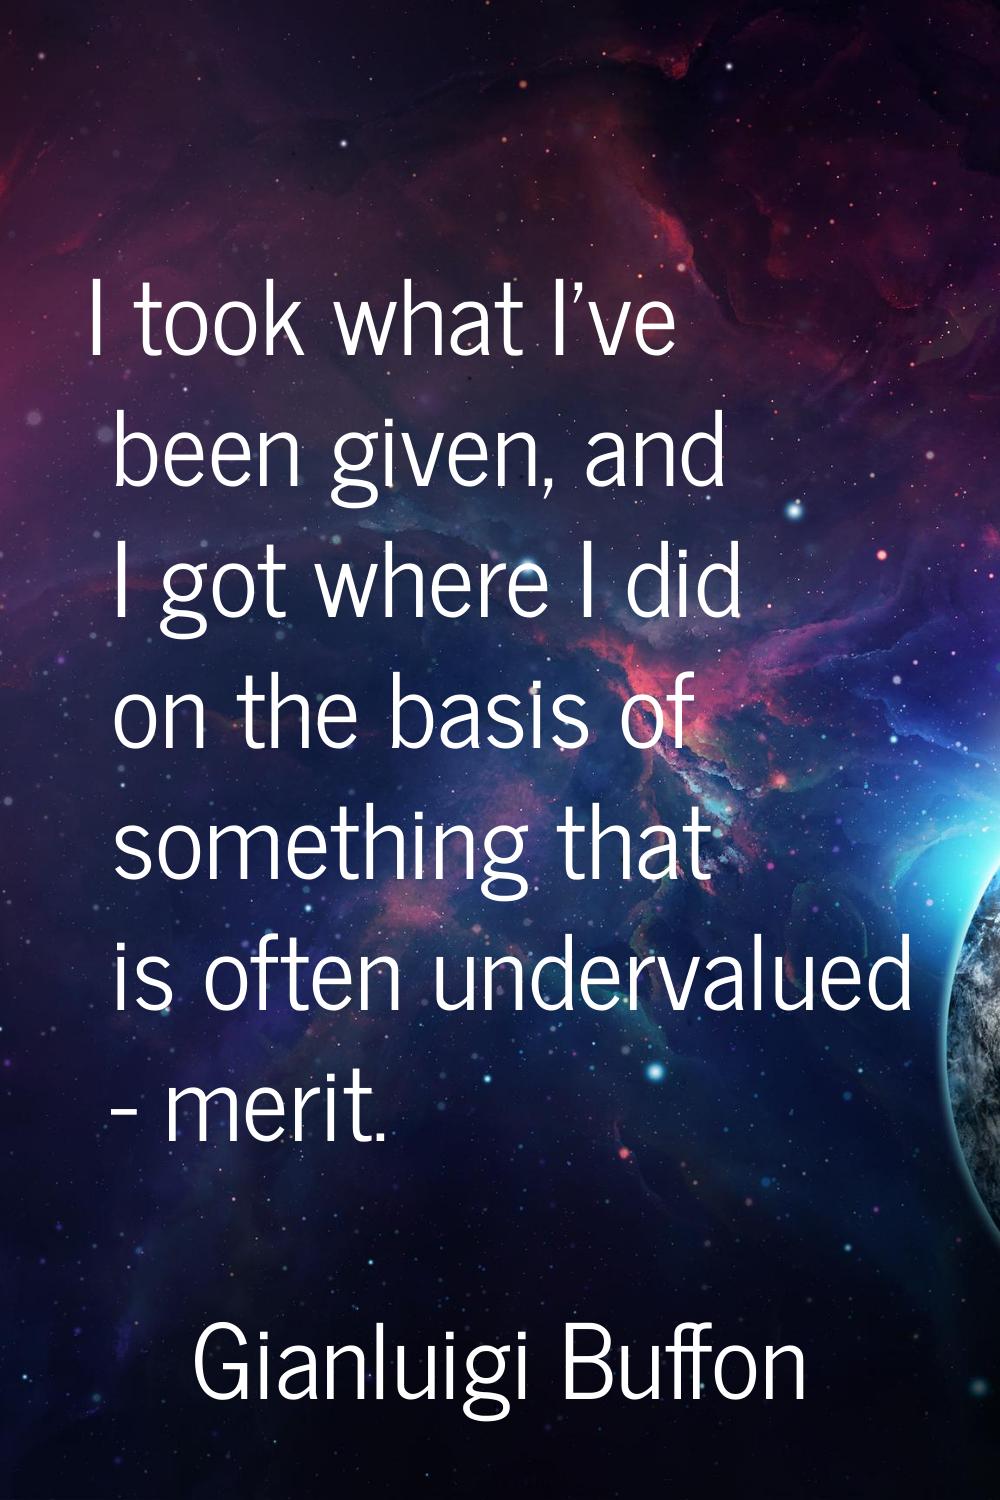 I took what I've been given, and I got where I did on the basis of something that is often underval